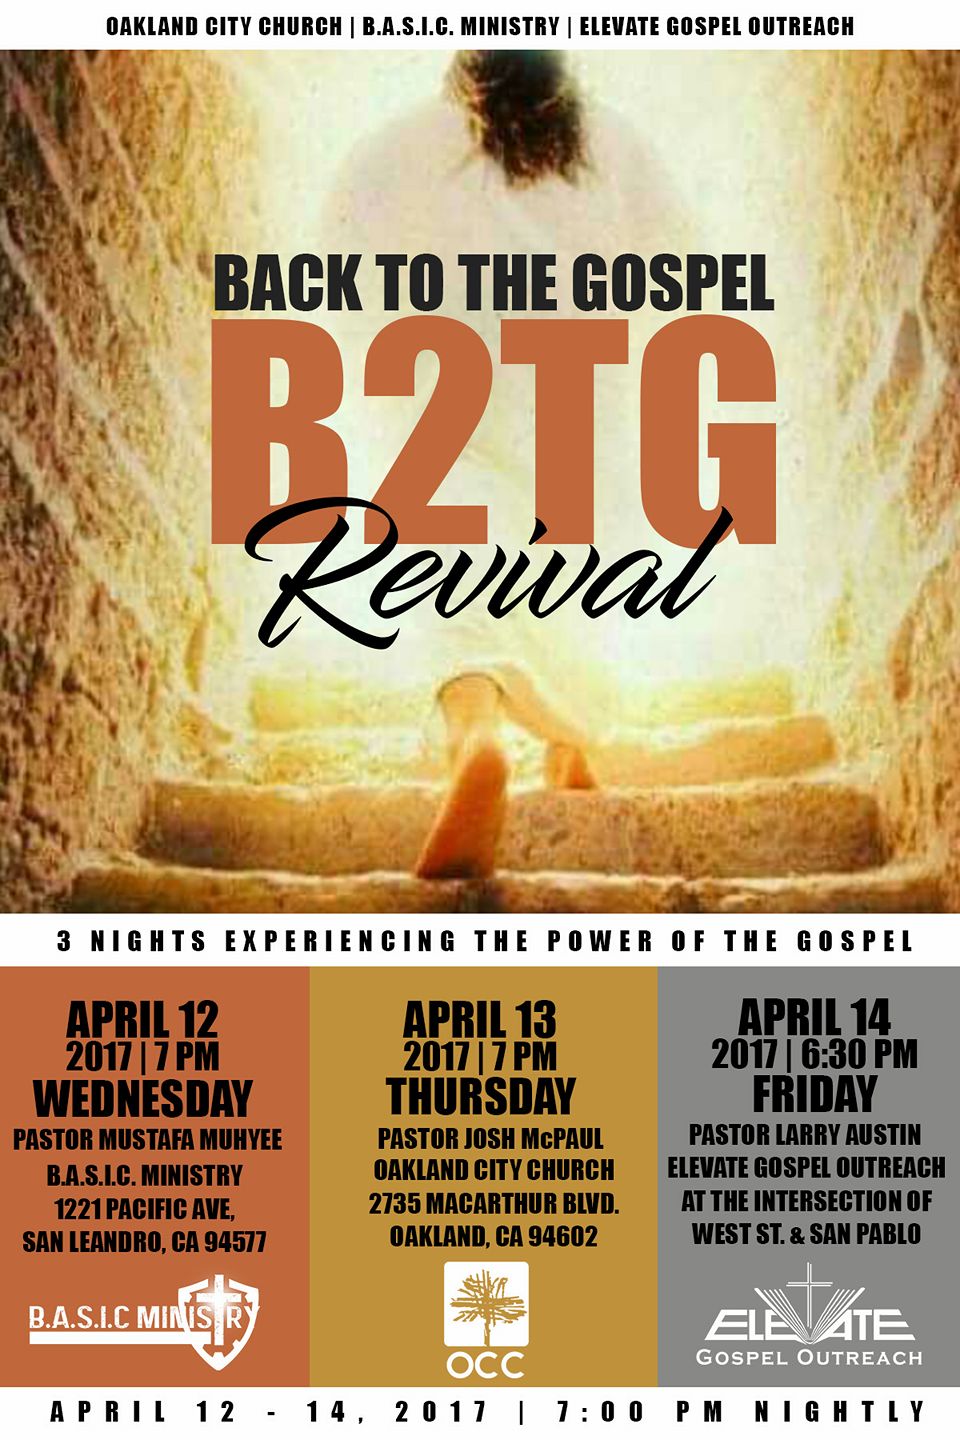 Back to the Gospel - Holy Week Revival